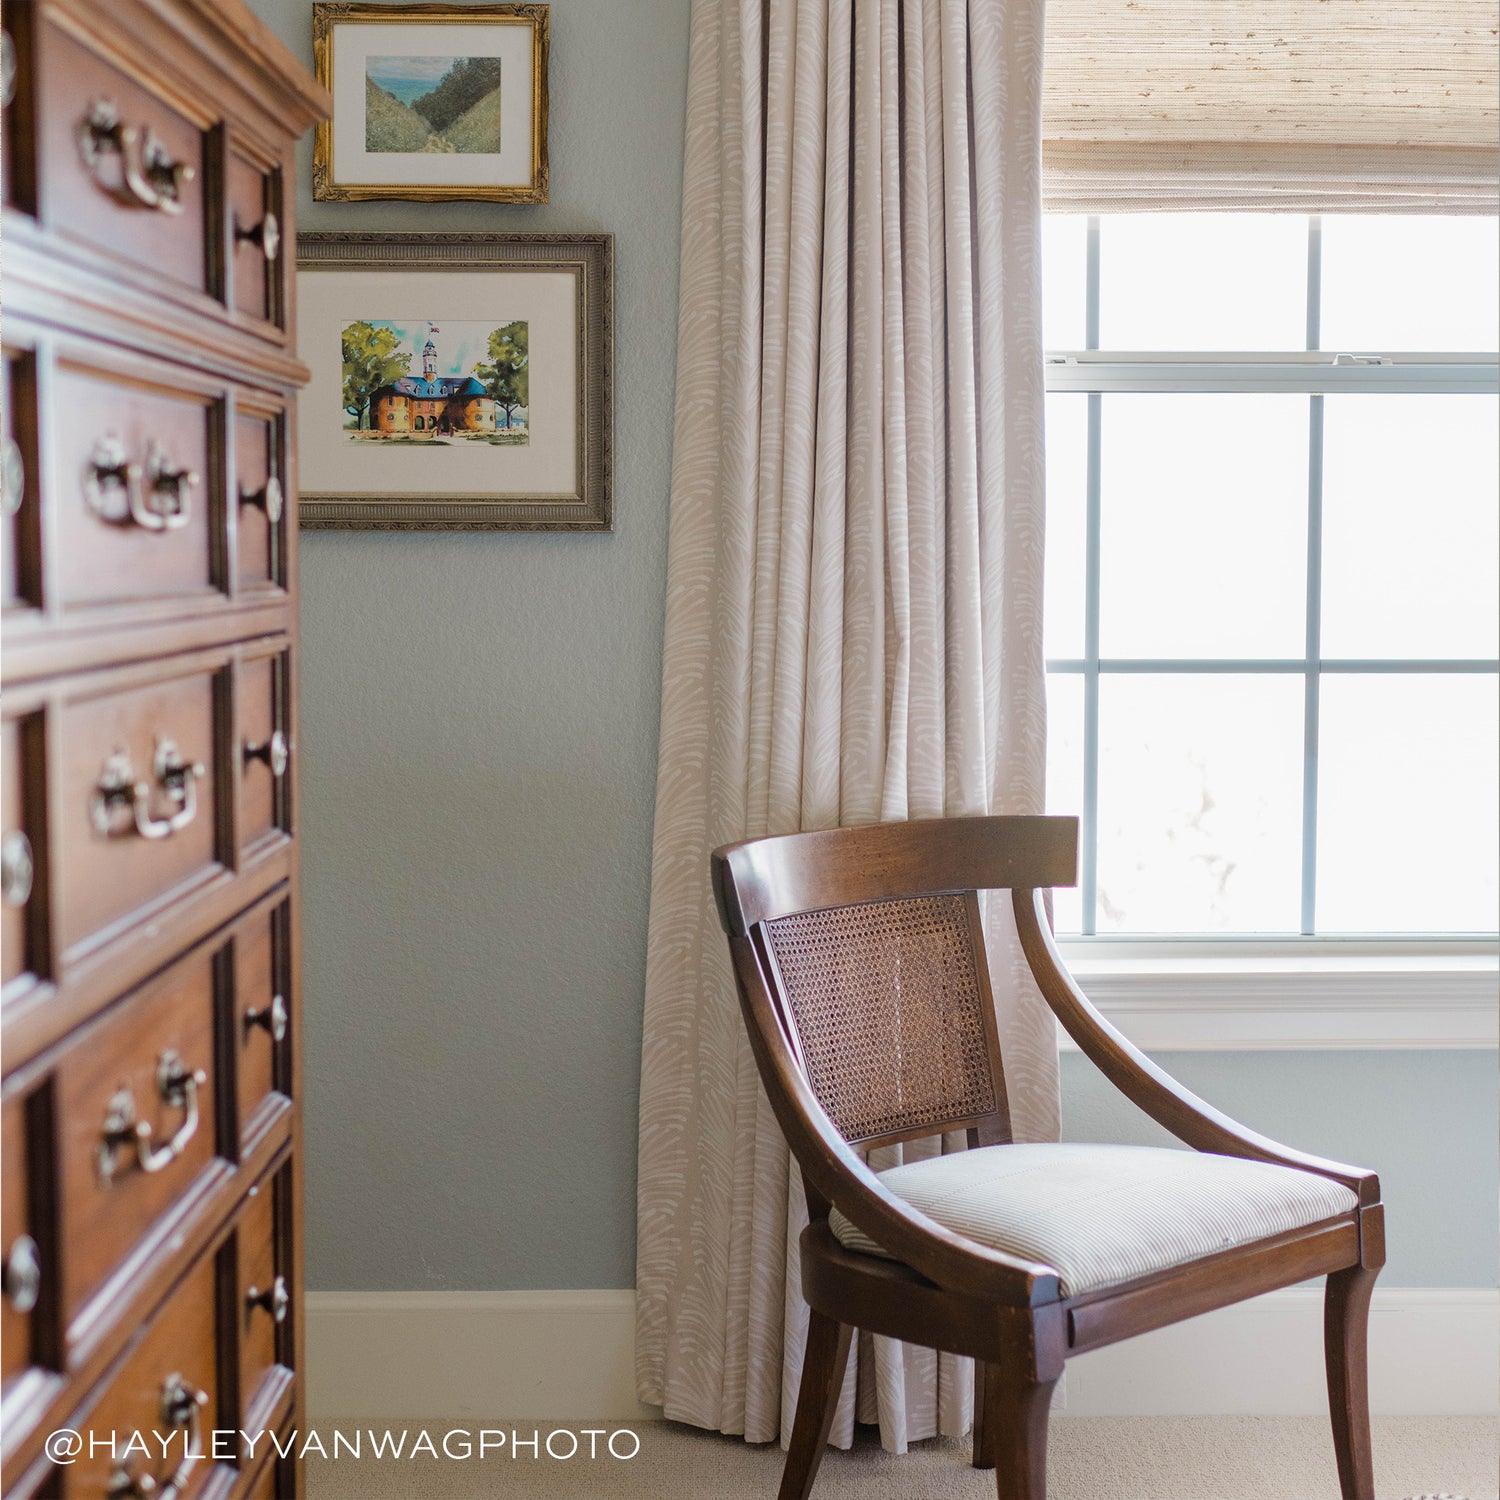 Corner styled with Beige Botanical Stripe Printed Curtain in front of illuminated window with wooden chair next to wooden drawers. Photo taken by Hayley Vanwag Photo